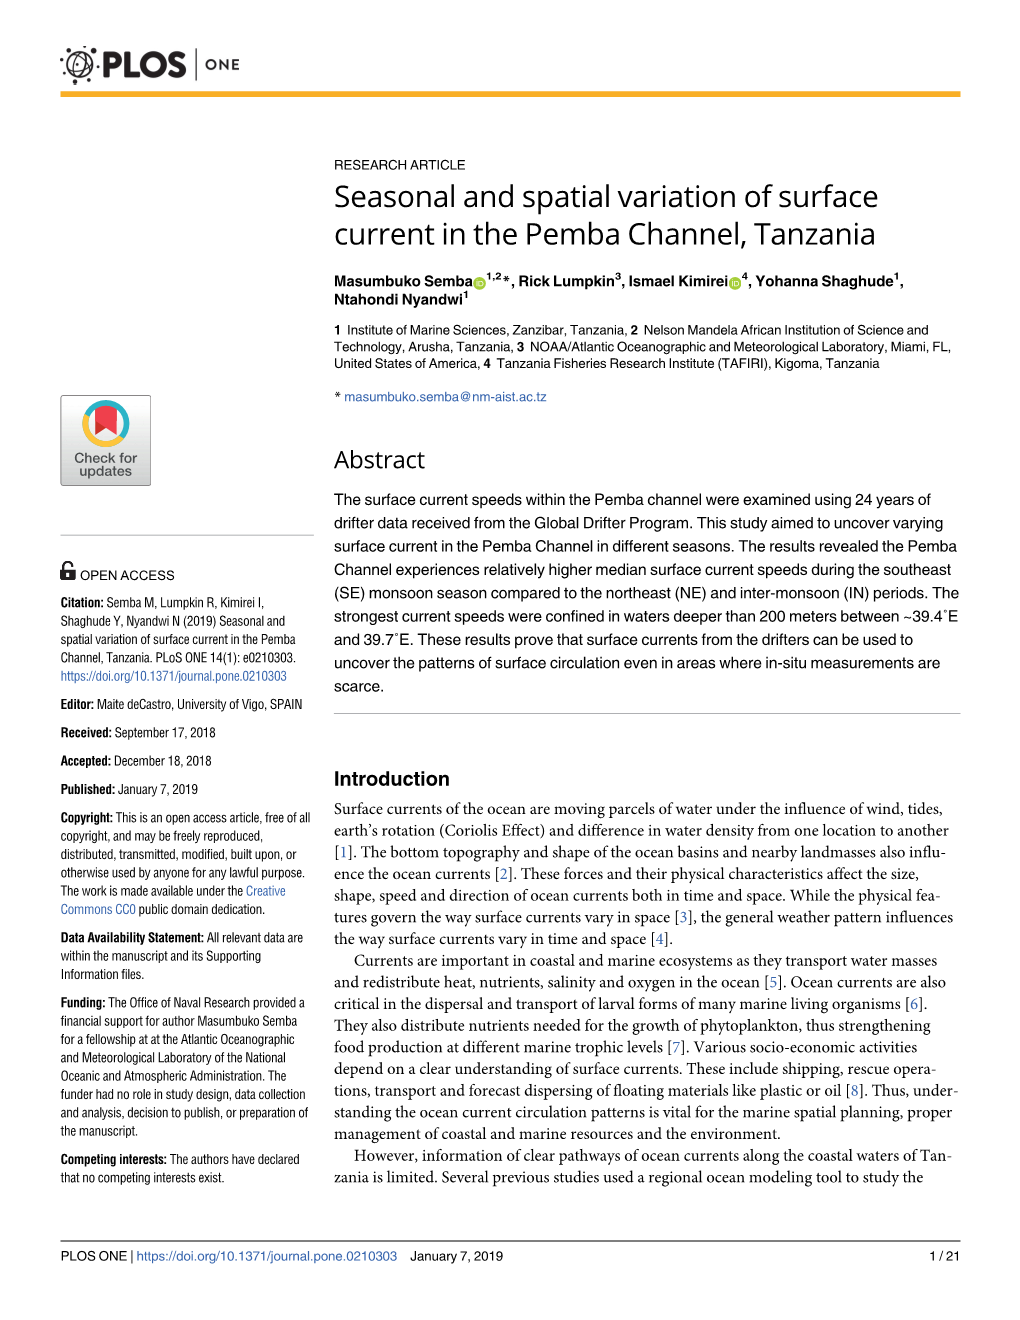 Seasonal and Spatial Variation of Surface Current in the Pemba Channel, Tanzania